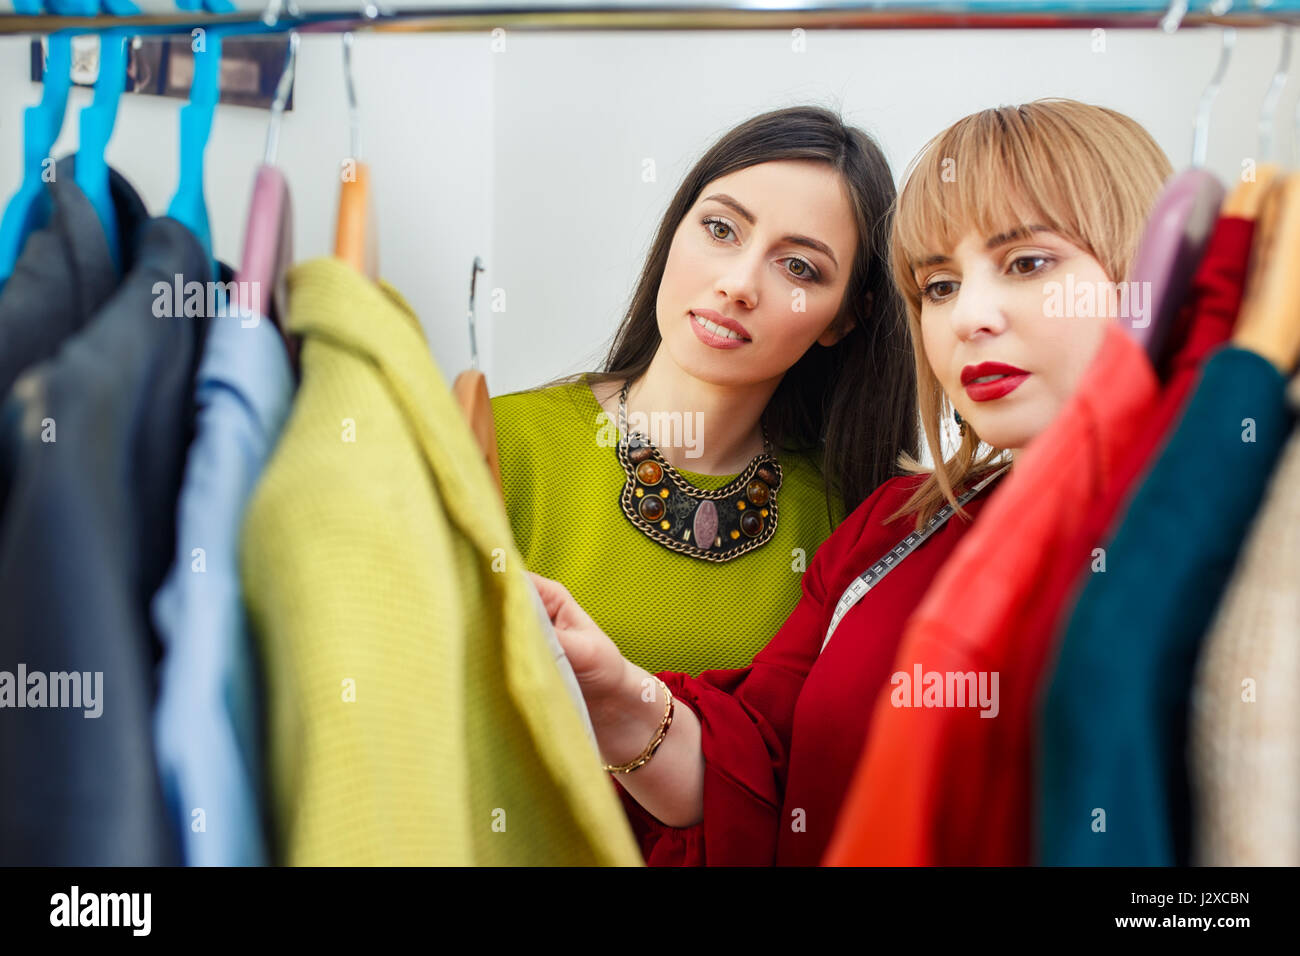 girl with stylist choosing her fashion outfit. Women looking at clothes hanging deciding what to wear. Analysis of wardrobe. Fashion stylist consultat Stock Photo